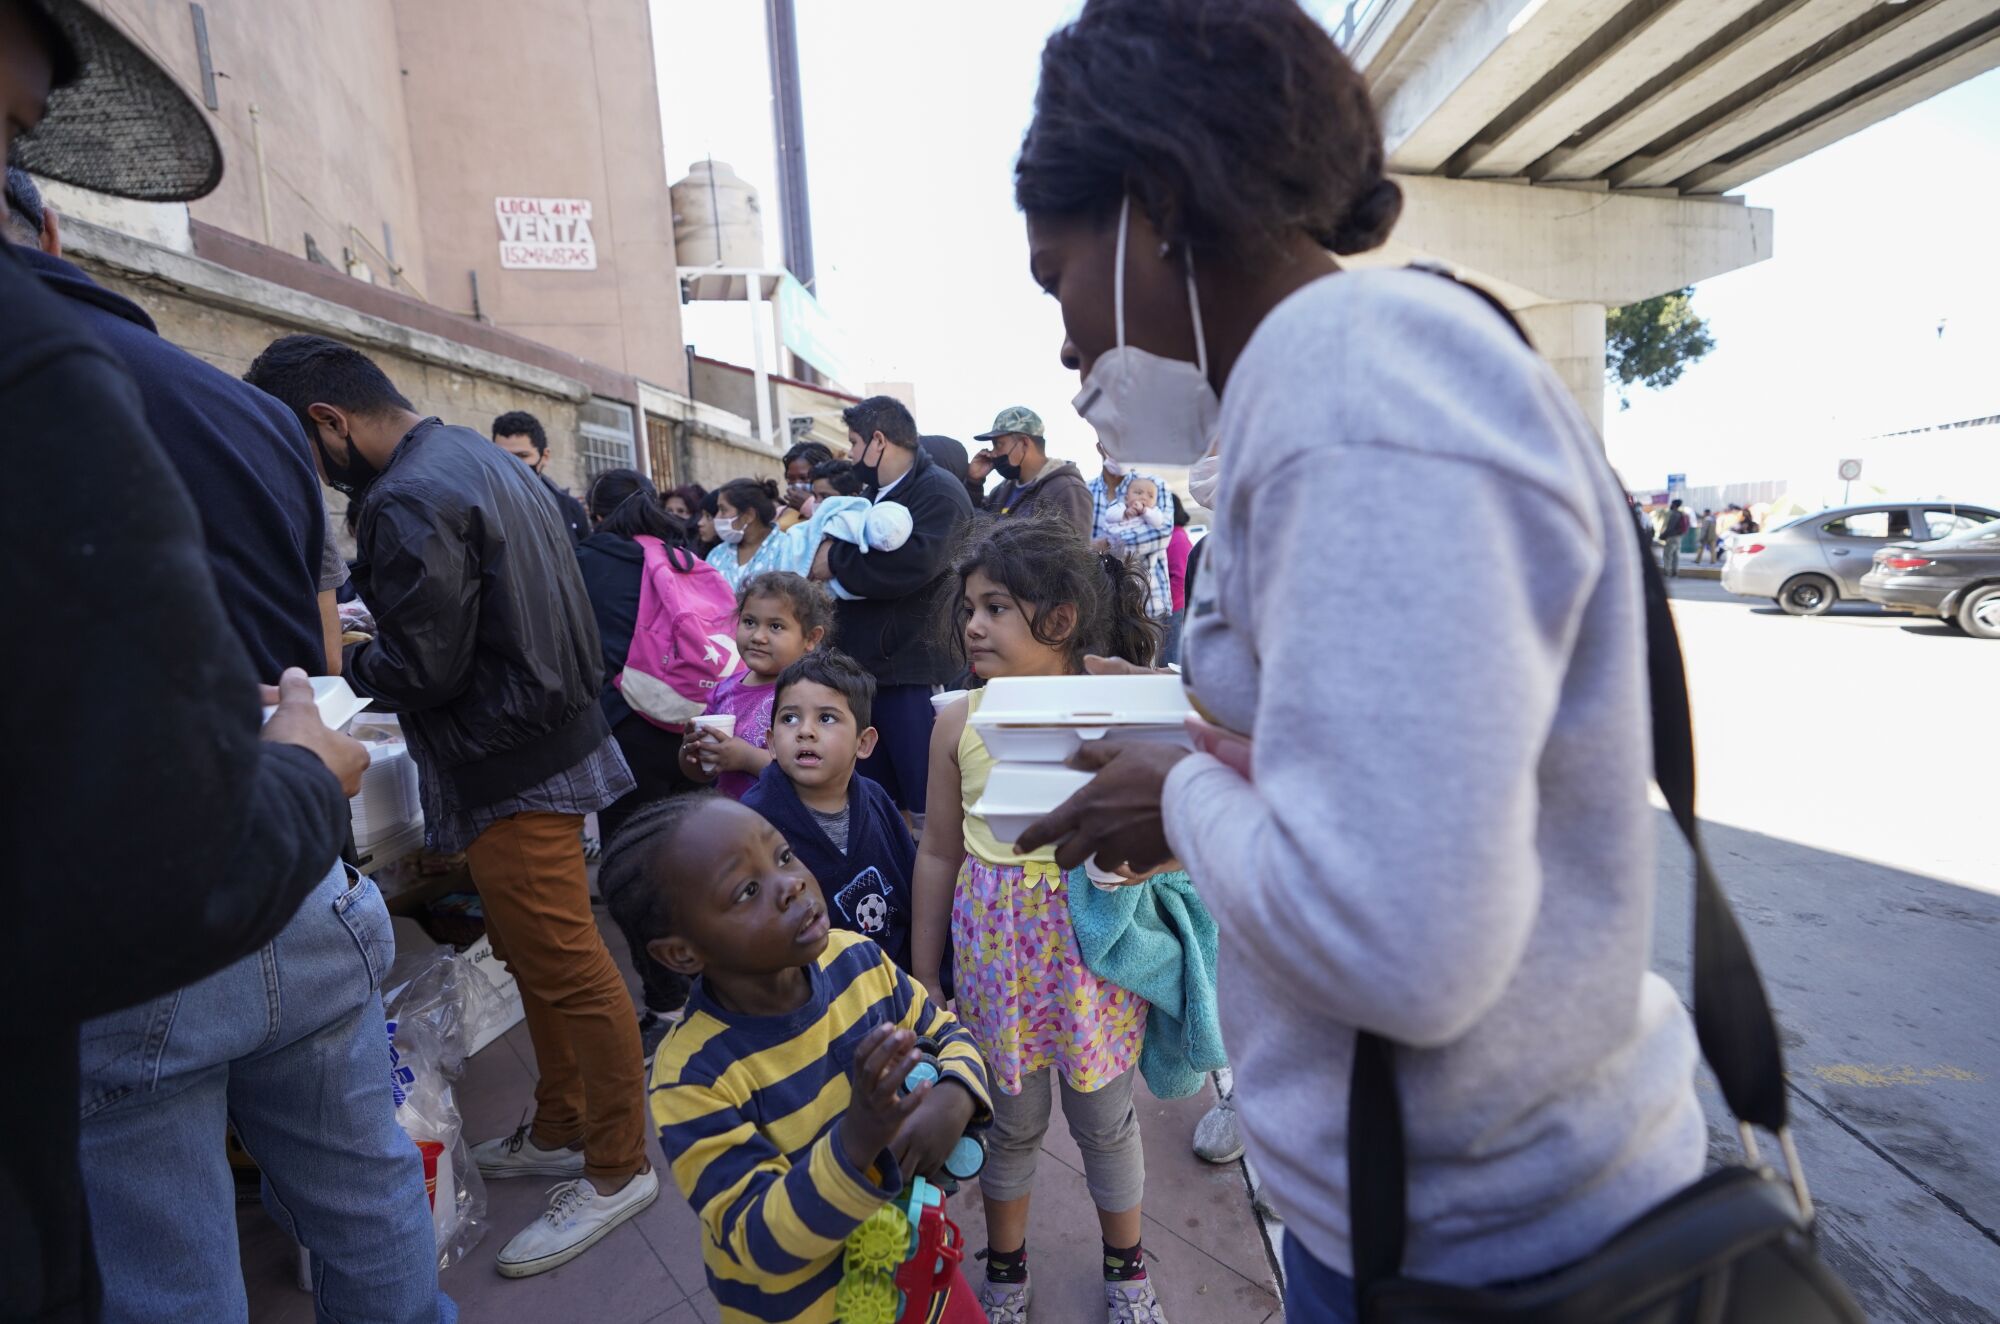 Migrants, including small children, wait in line for food.